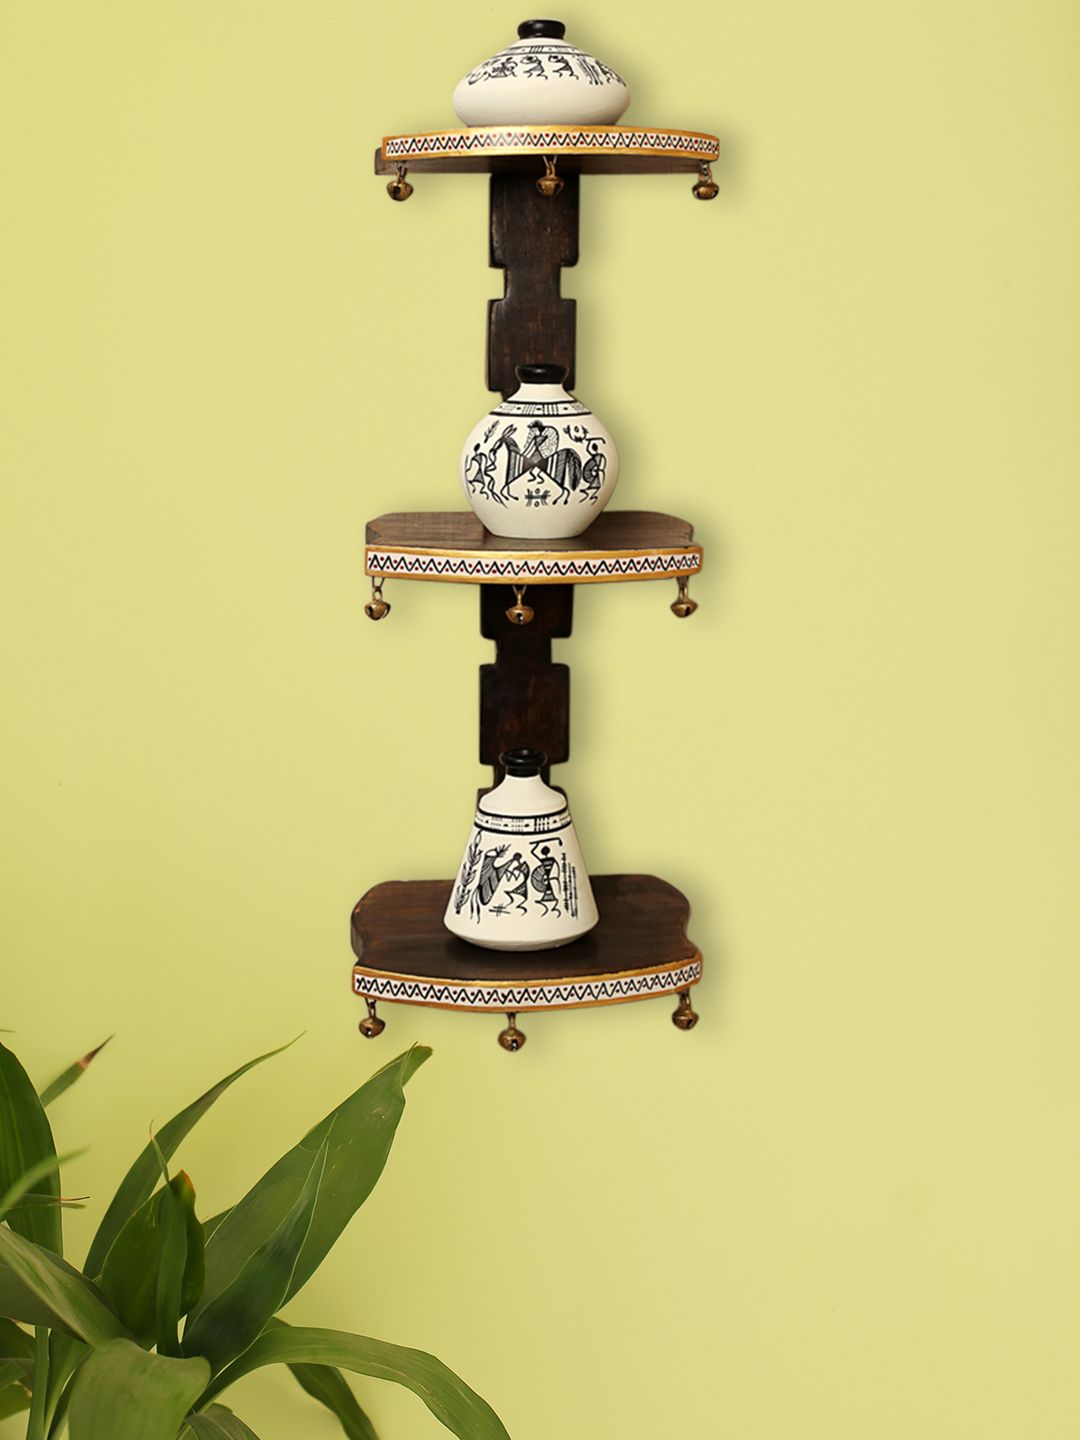 ExclusiveLane Wooden Wall Shelf With 3 Pc Terracotta Warli Handpainted Pots Price in India